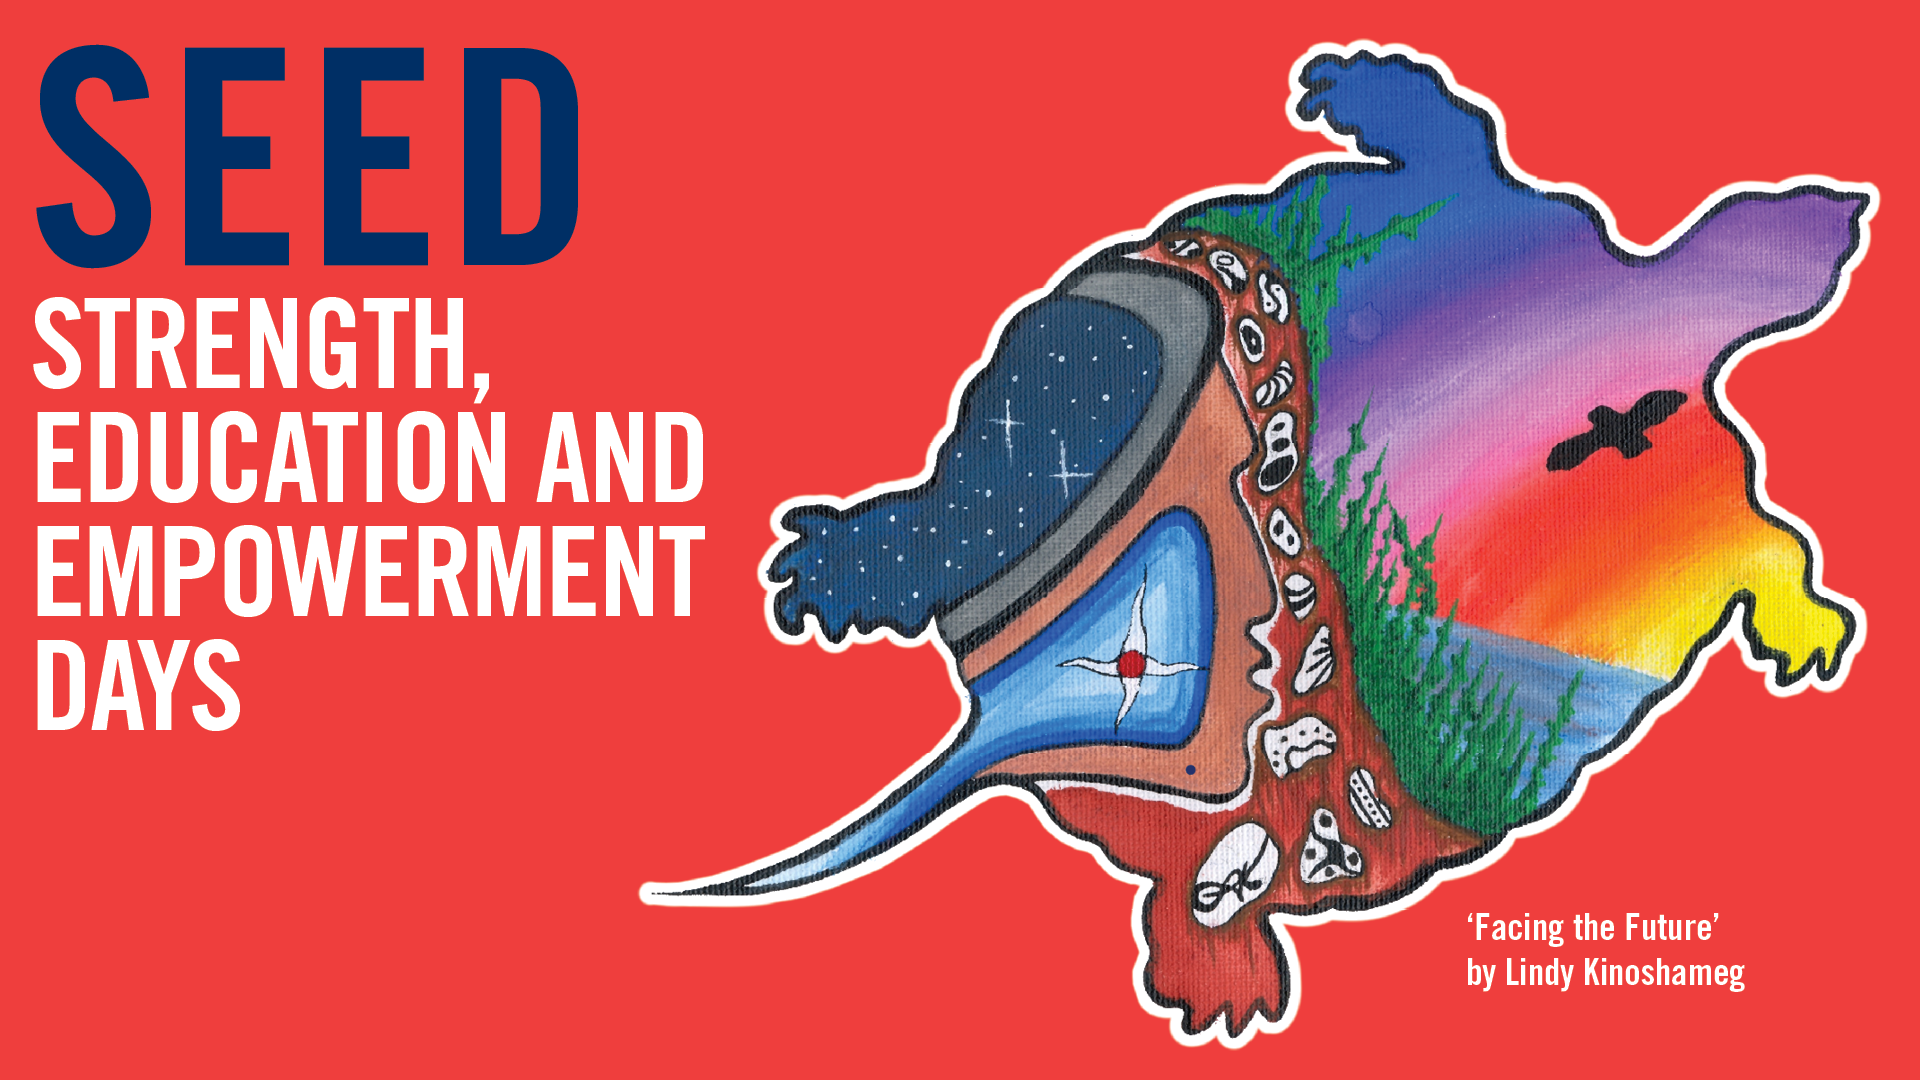 Turtle Art with Program Title on red - SEED, Strength Education and Empowerment Days